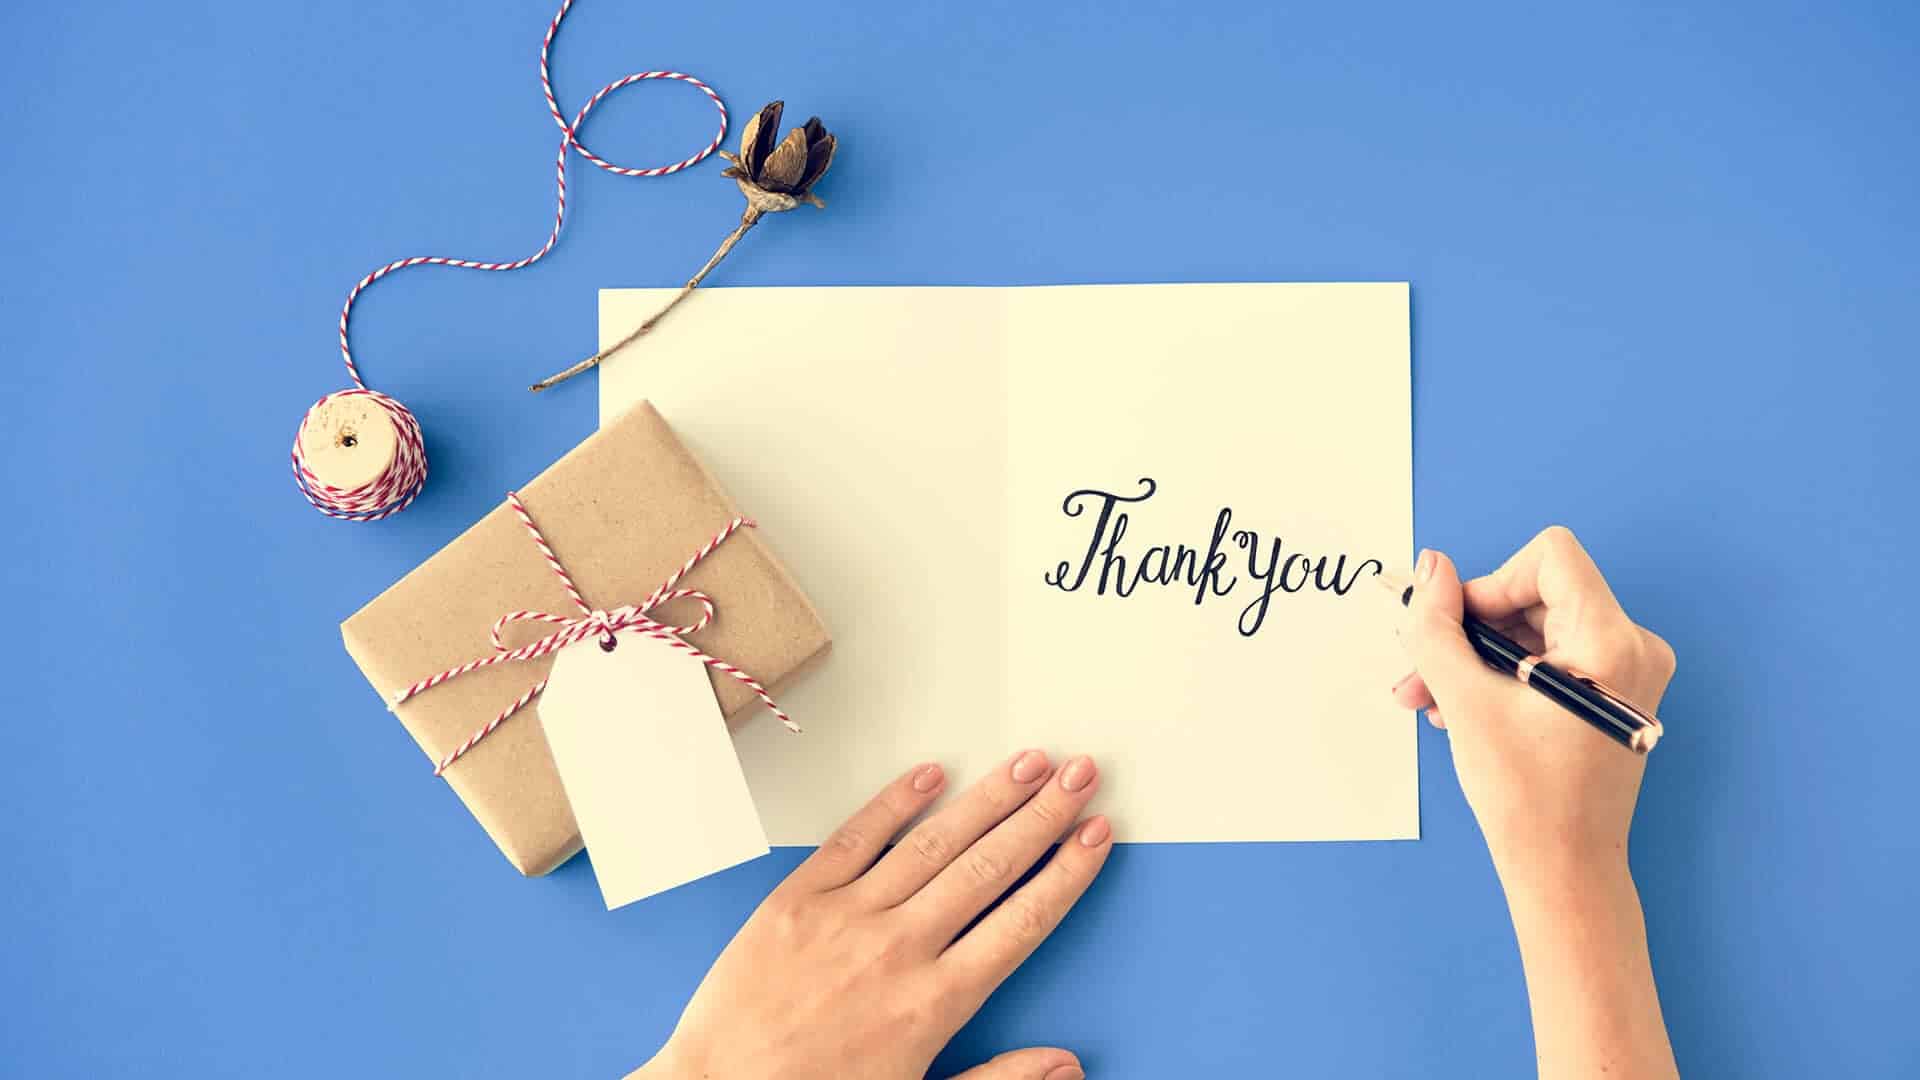 Connect With Your Customers By Saying Thank You